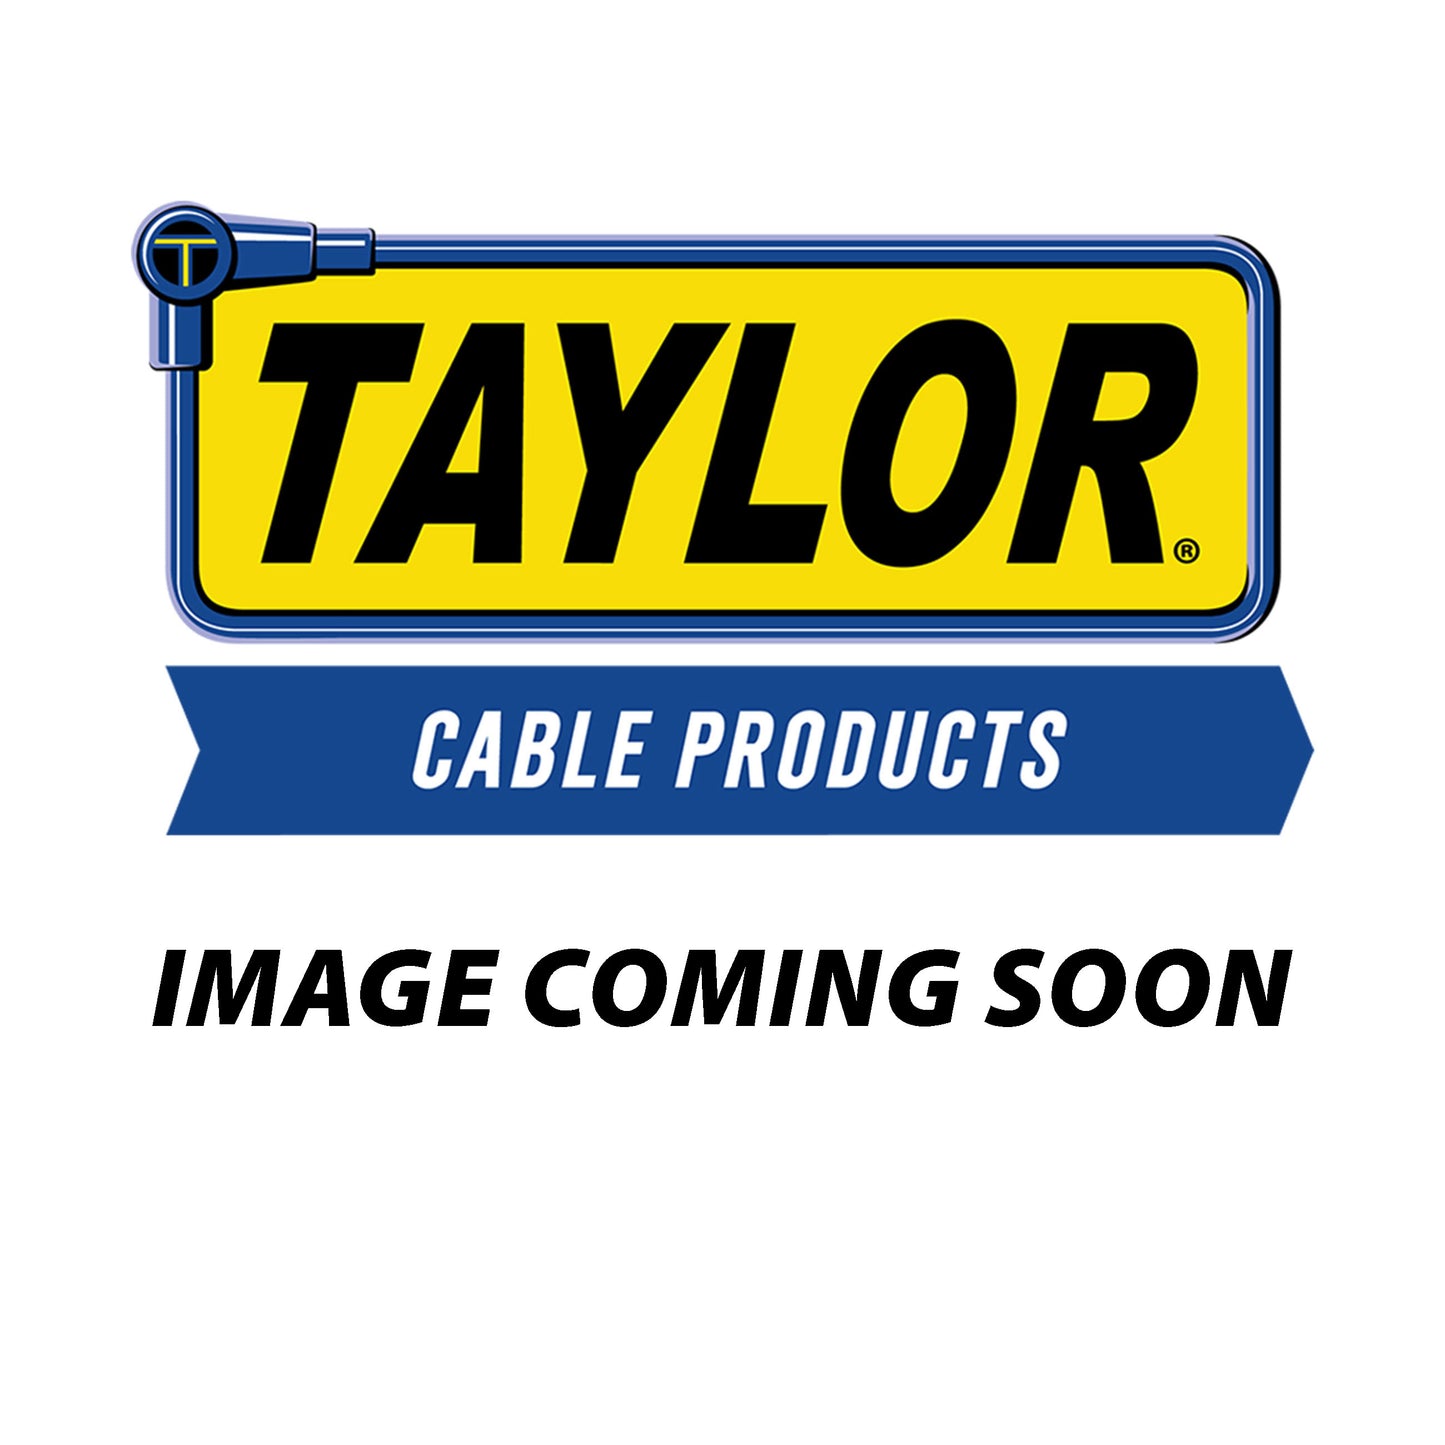 Taylor Cable 10231 8mm Spiro-Pro Motorcycle red 19/7in custom 90